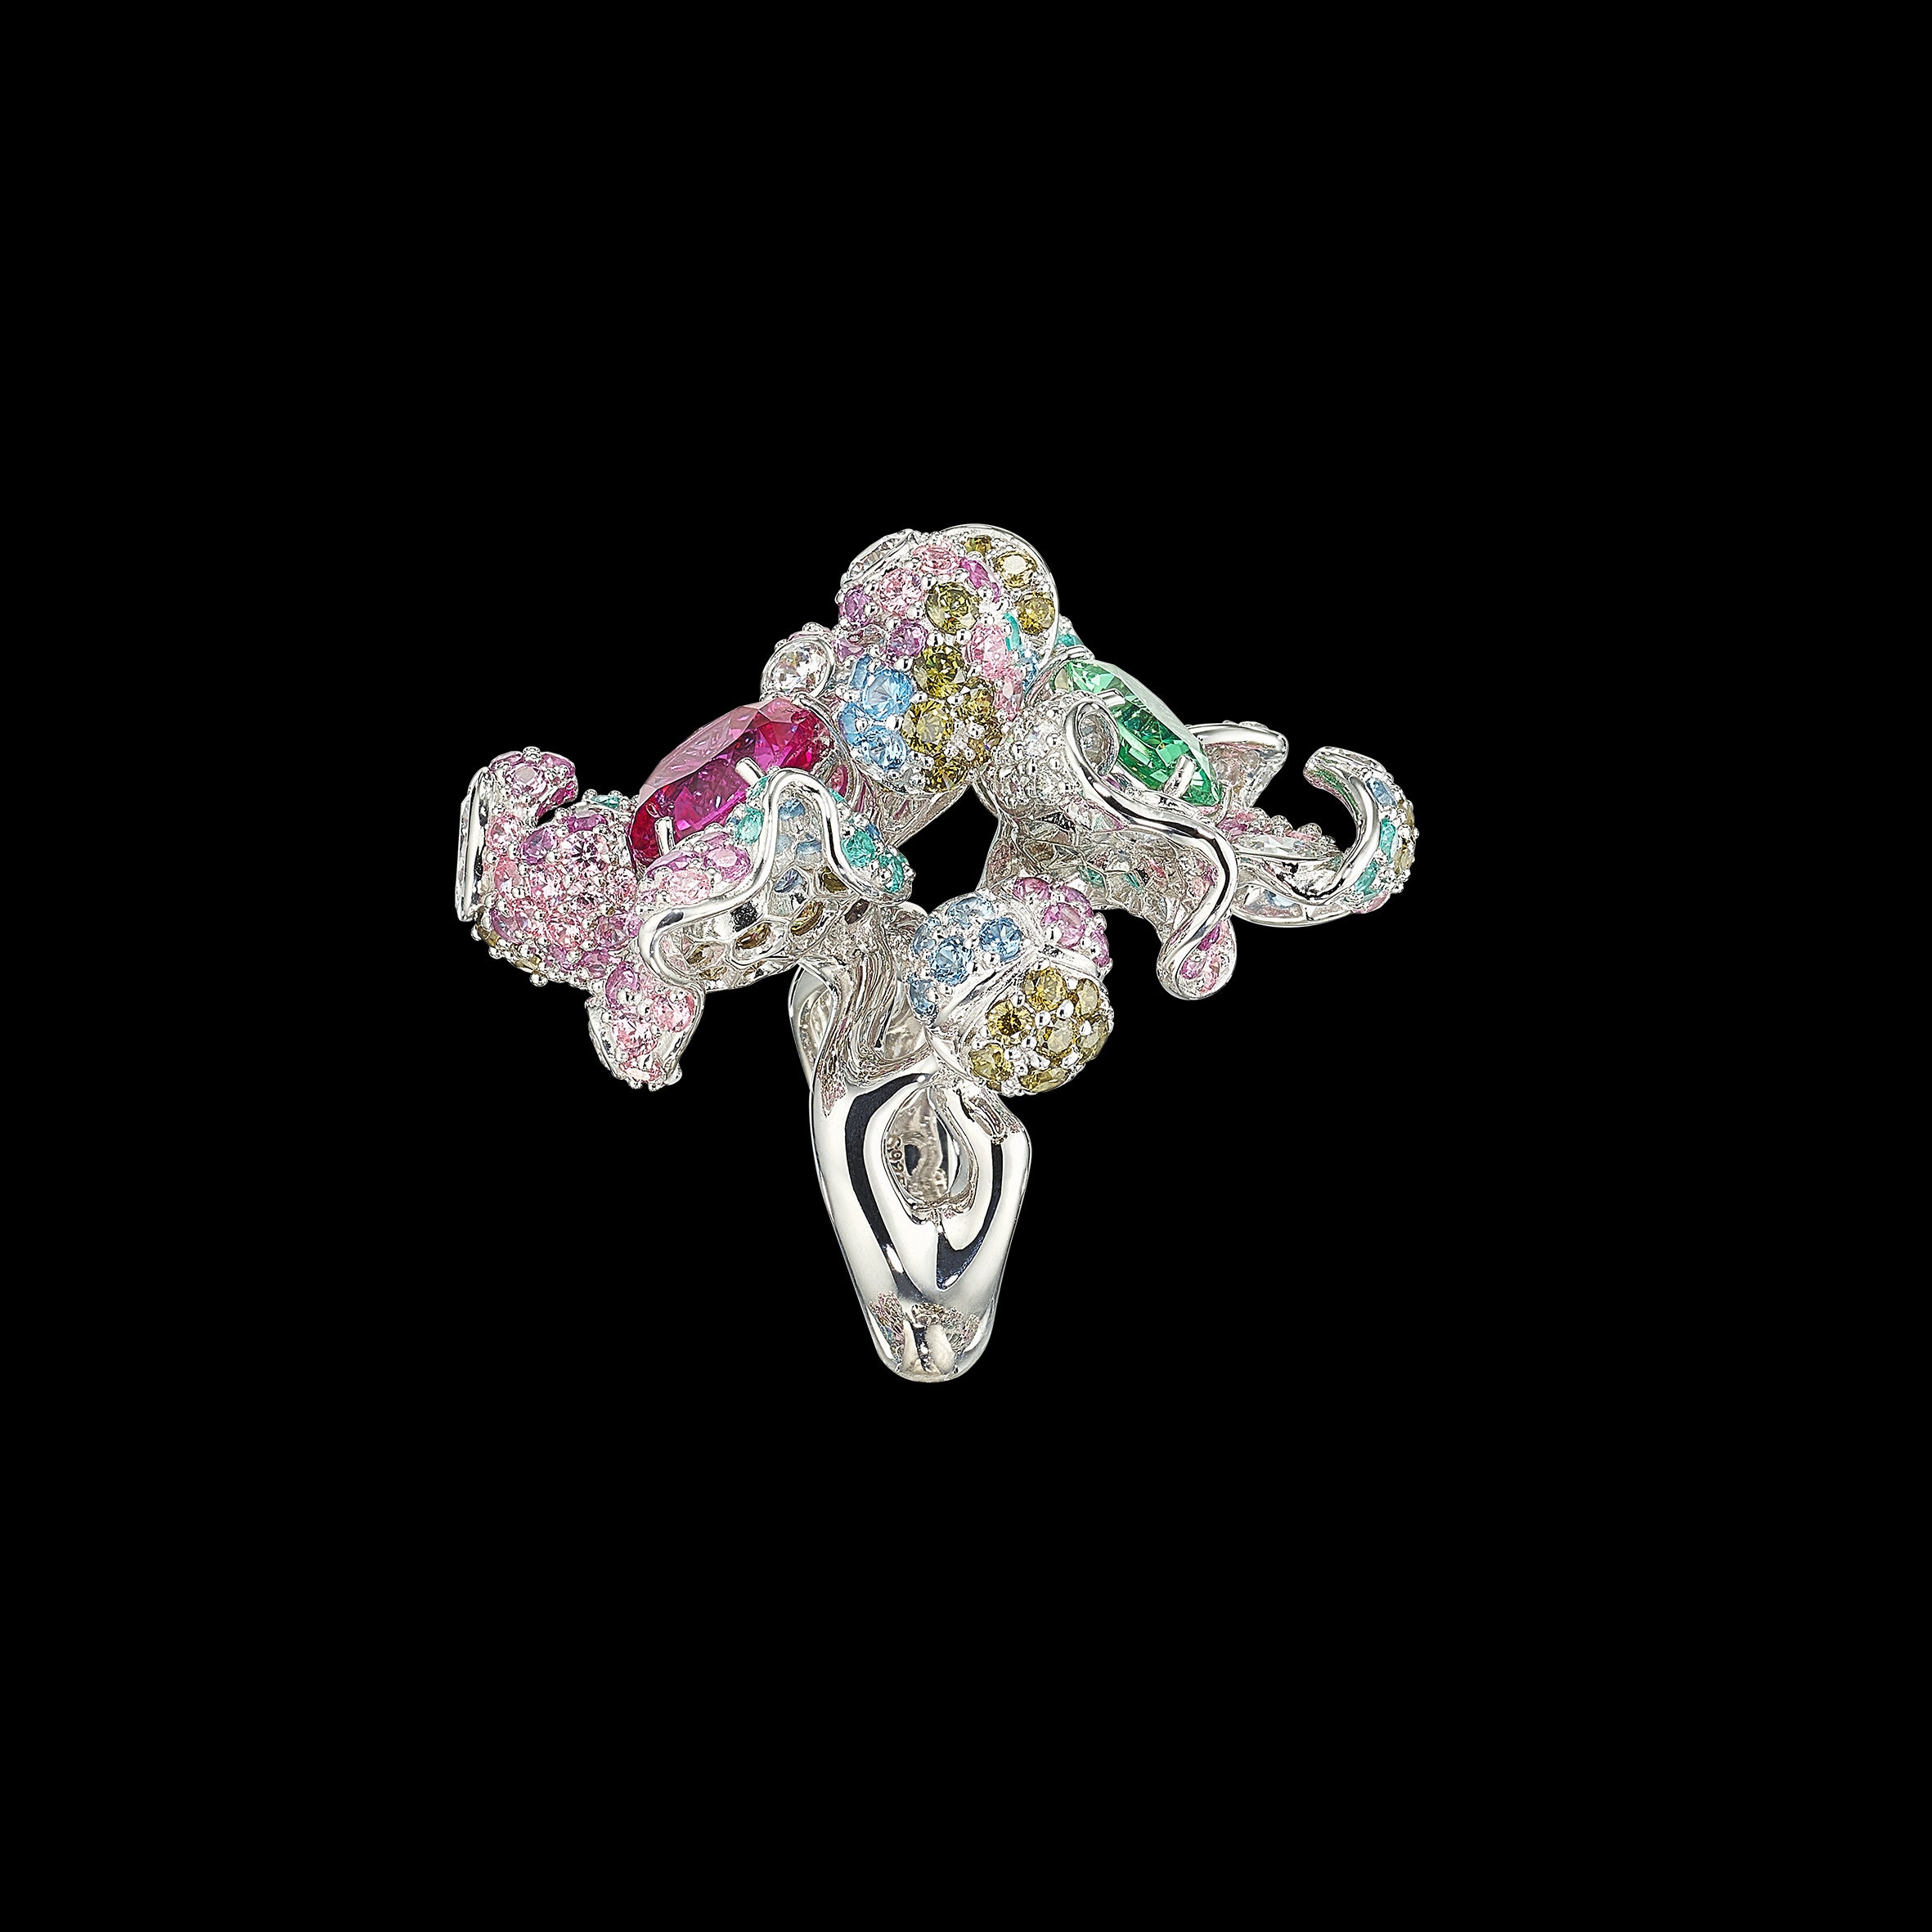 Garden Blossom Ring, Ring, Anabela Chan Joaillerie - Fine jewelry with laboratory grown and created gemstones hand-crafted in the United Kingdom. Anabela Chan Joaillerie is the first fine jewellery brand in the world to champion laboratory-grown and created gemstones with high jewellery design, artisanal craftsmanship and a focus on ethical and sustainable innovations.